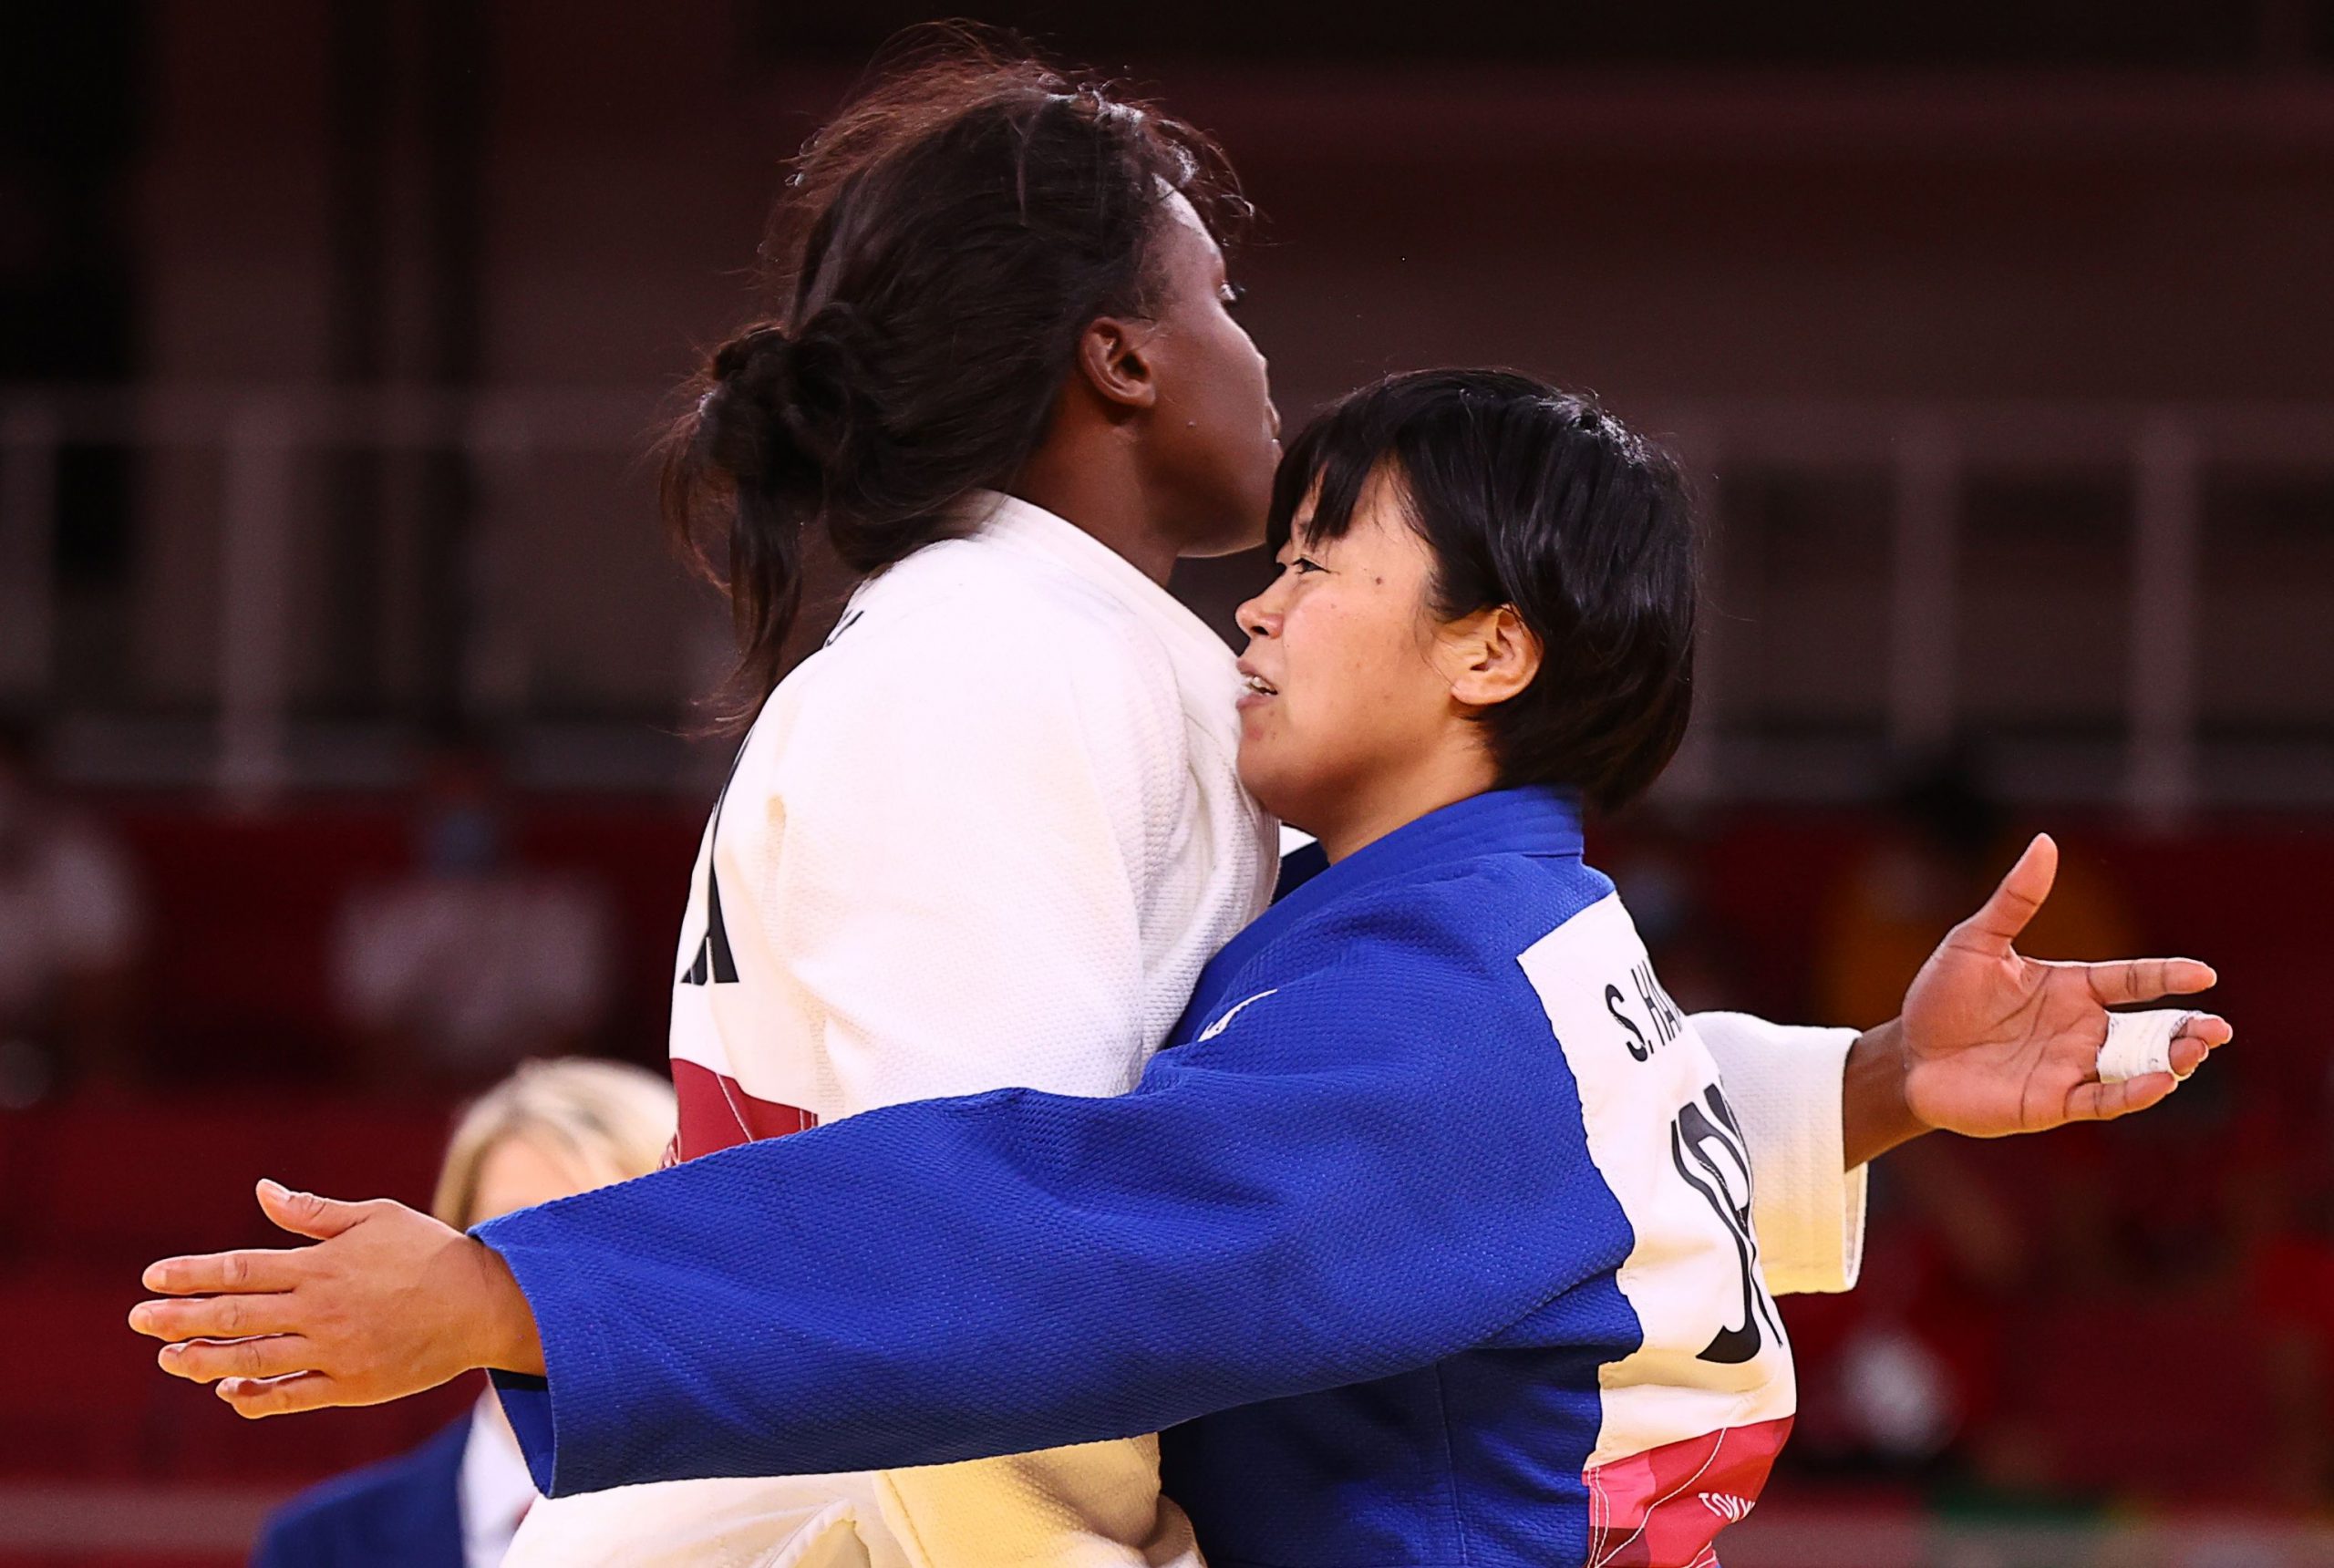 Judo Women's 78 KG: A Series of Intense Bouts Culminates Into A Gold For Shori Hamada of Japan